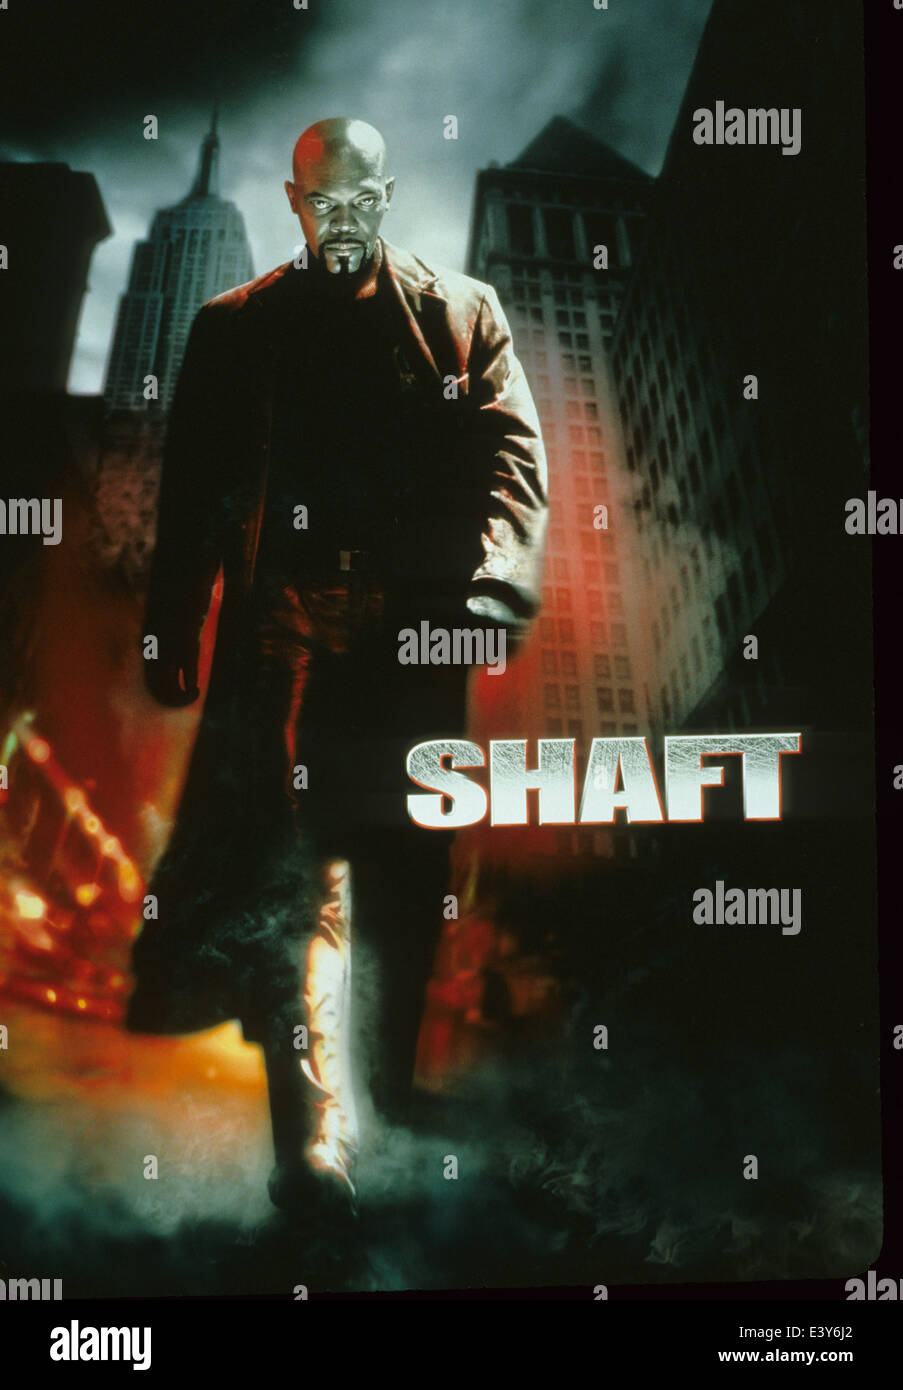 SHAFT  Poster artwork for 2000 Paramount Pictures film with Samuel L. Jackson Stock Photo